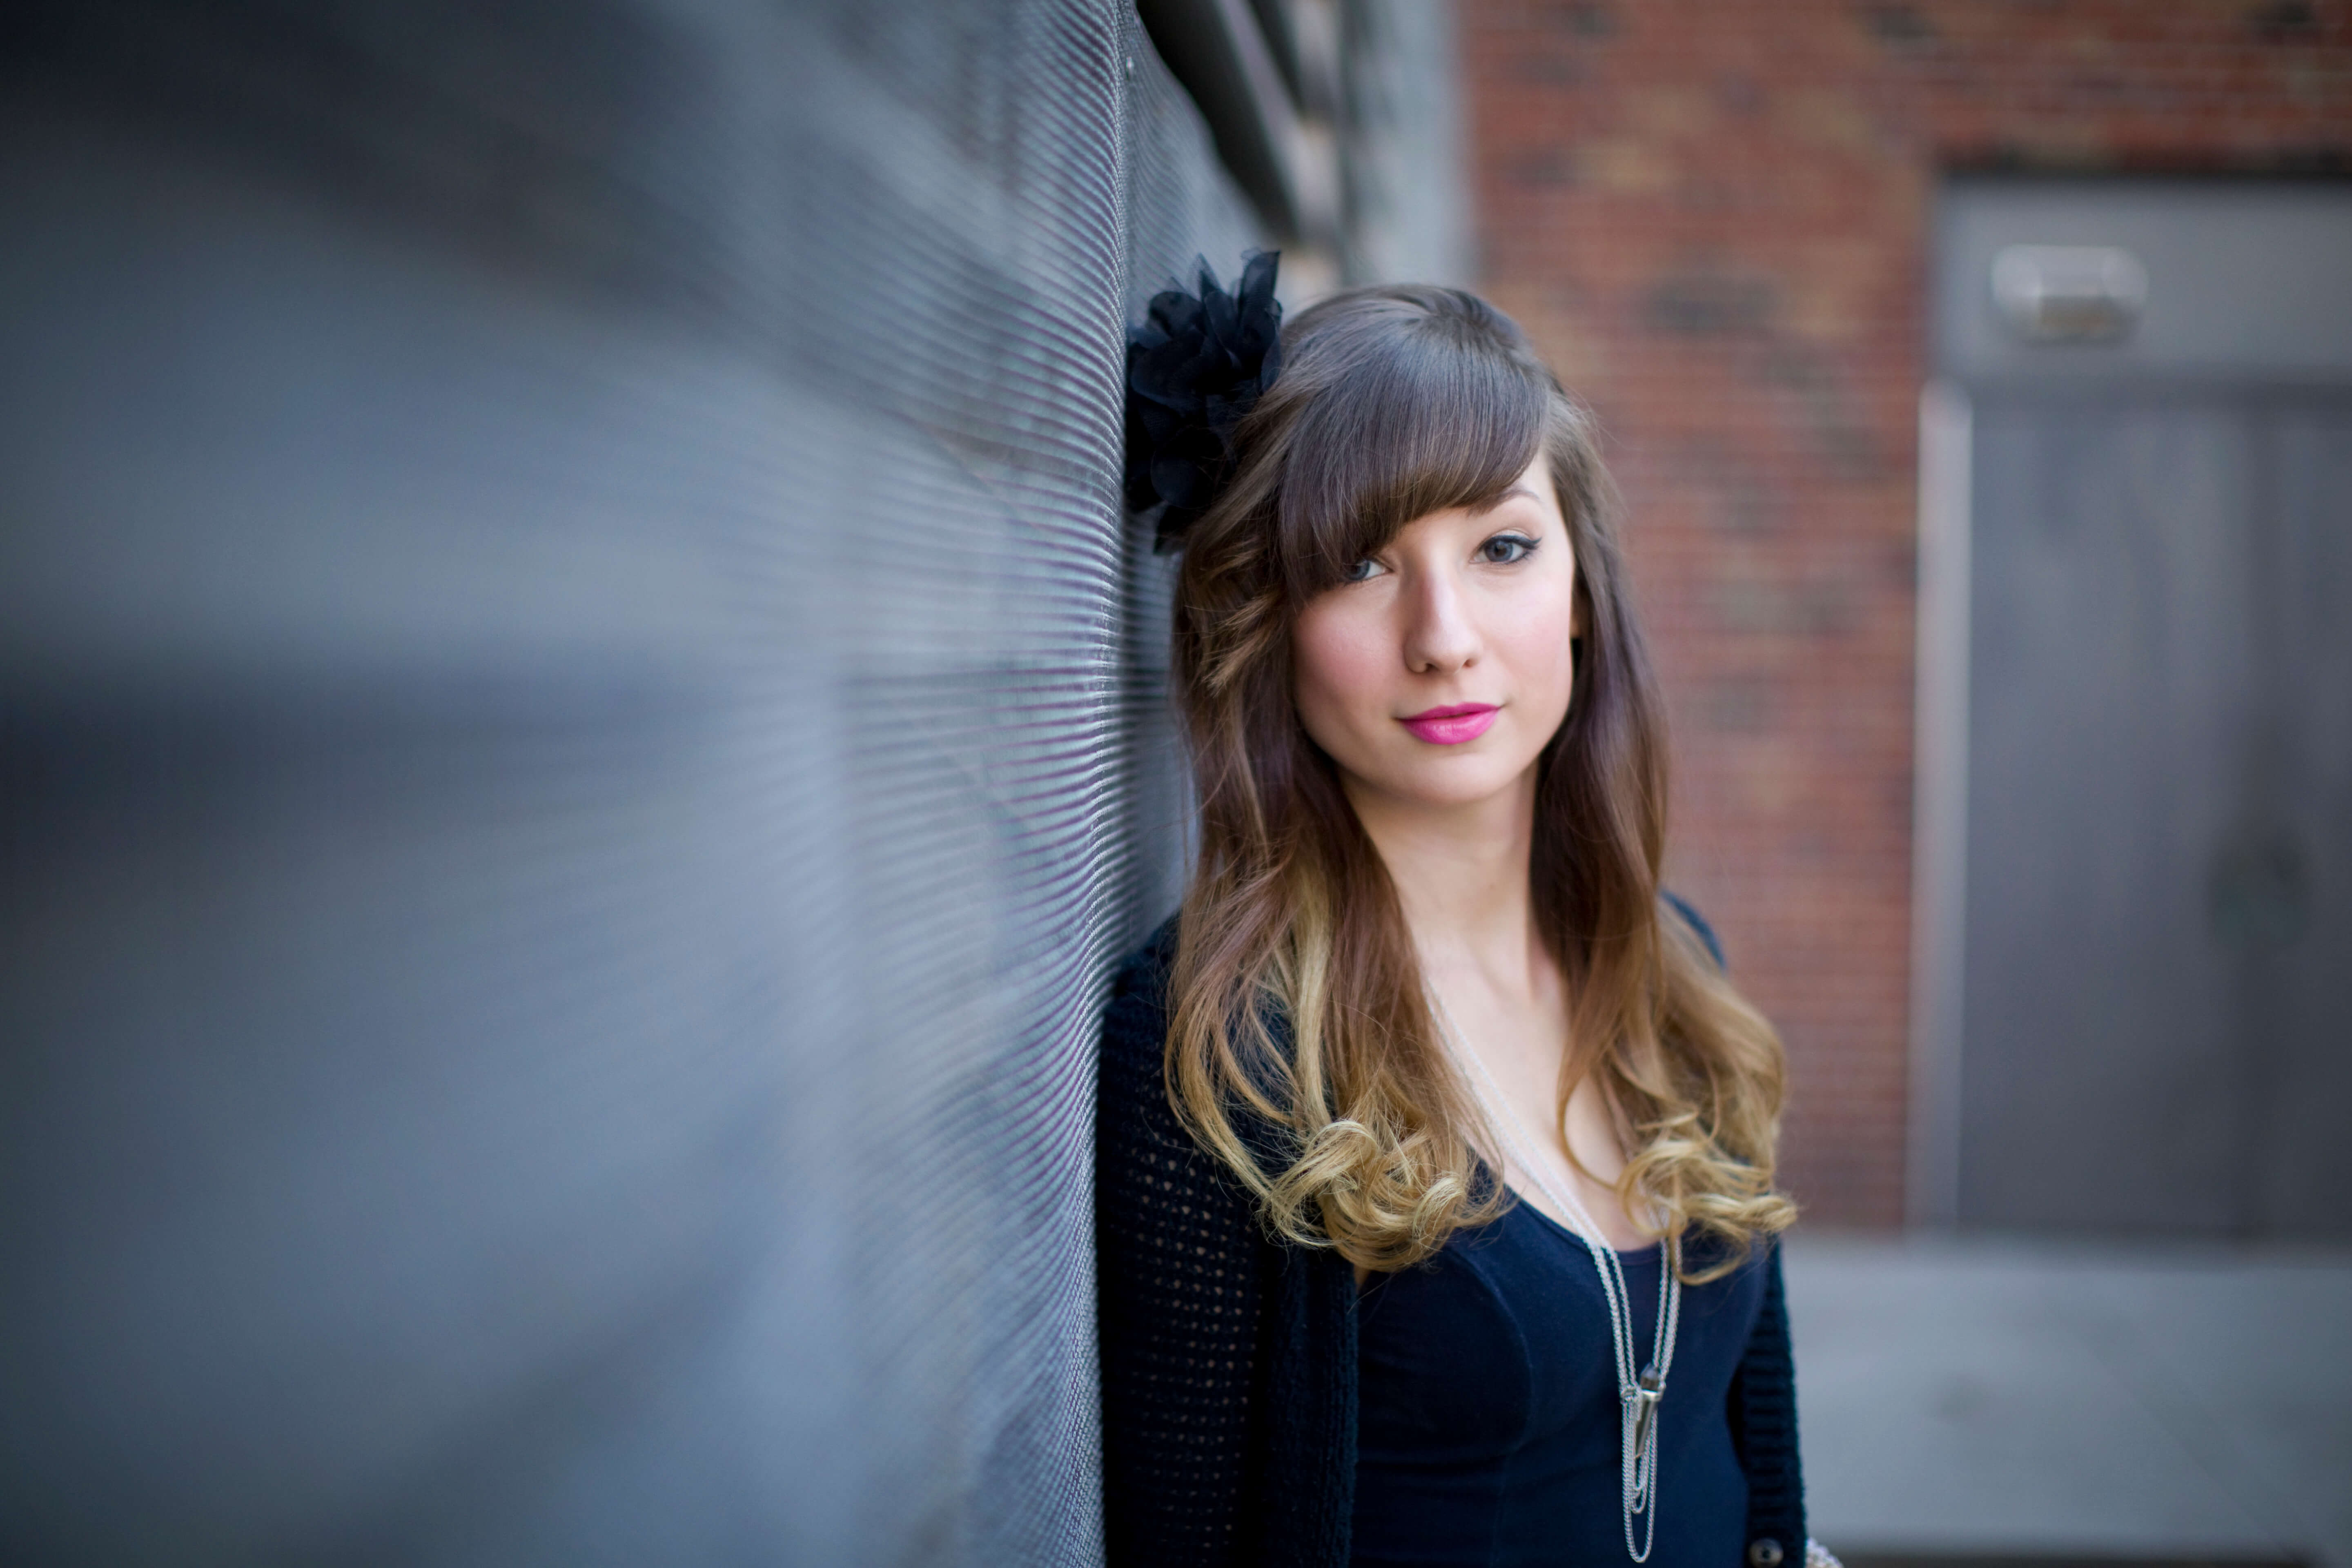 Musician & marketer Simona Benenati is inspired by how much Rochester loves the arts